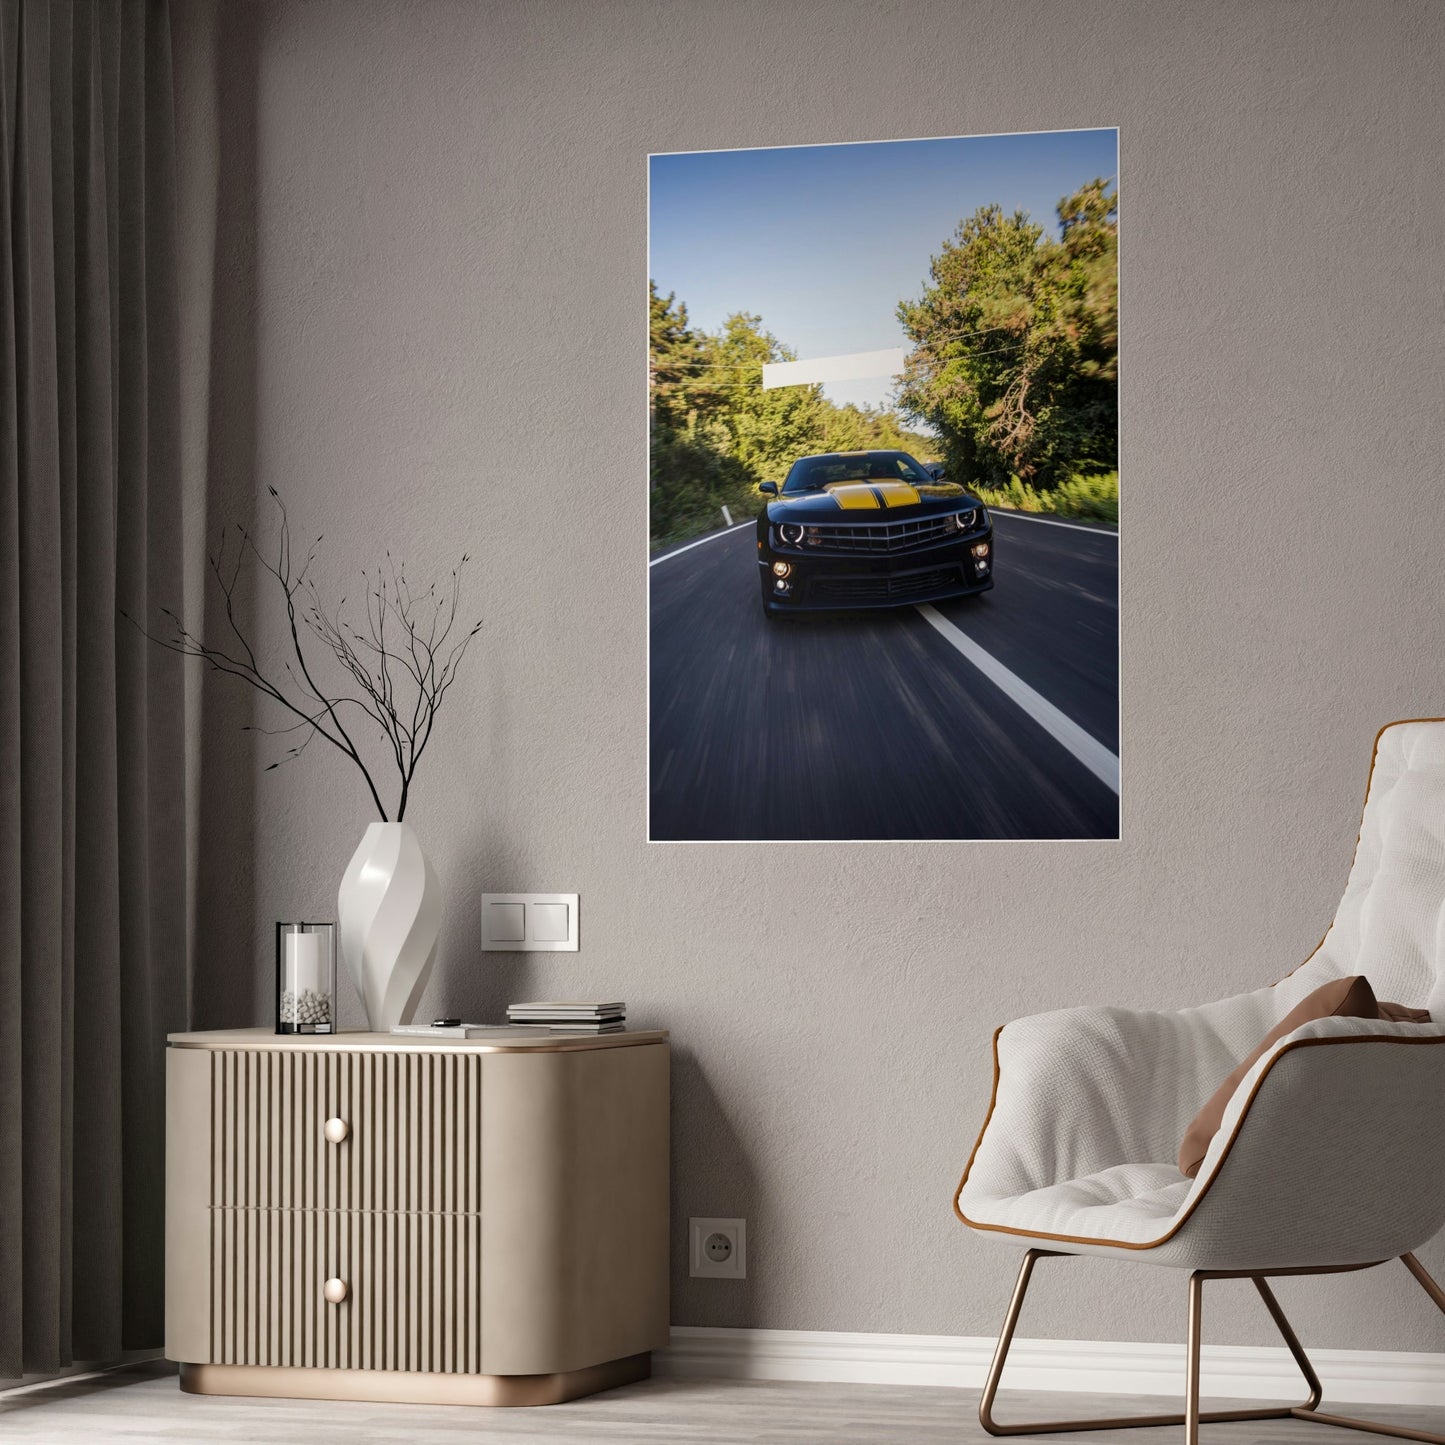 Rev Up Your Walls: Camaro Art on Framed Canvas and Posters